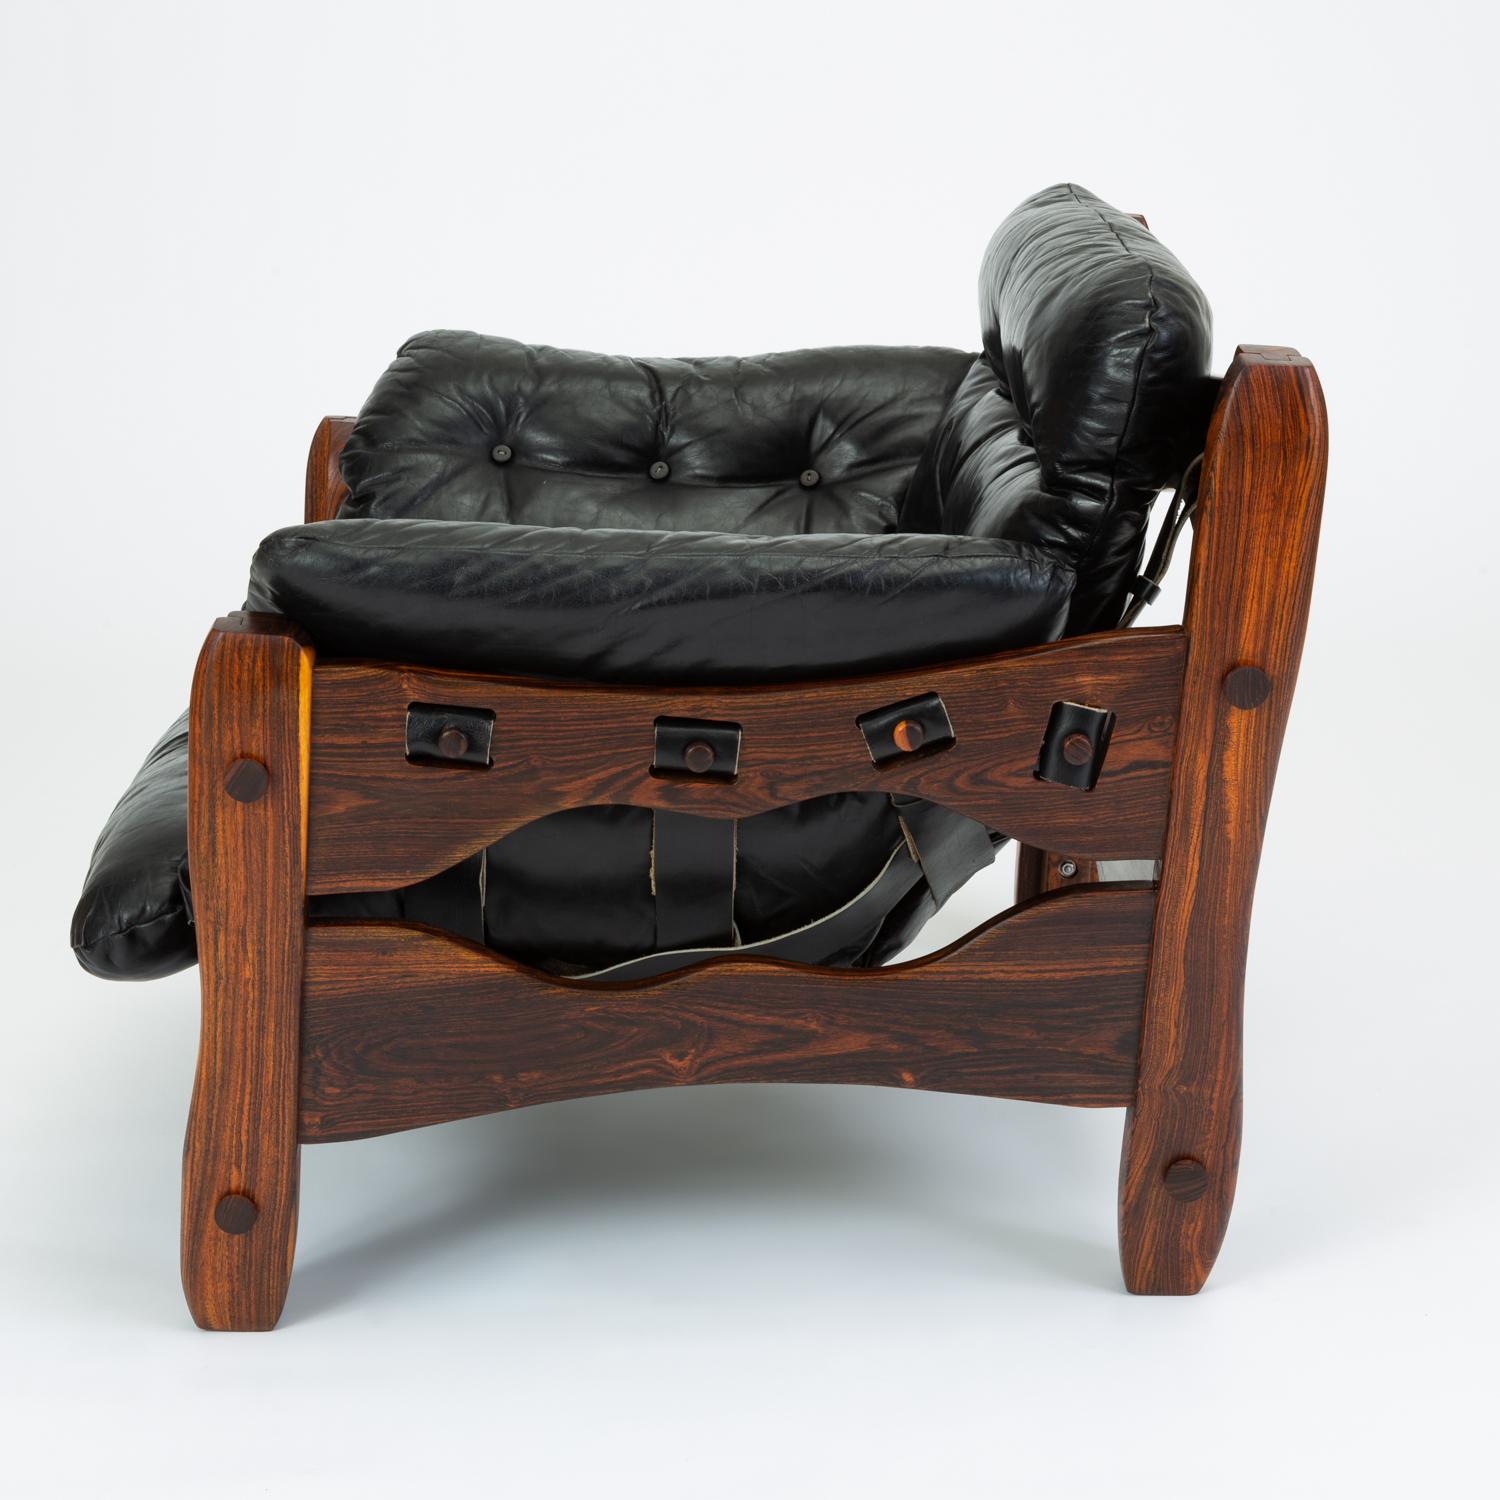 Late 20th Century Descanso Lounge Chair by Don Shoemaker for Señal in Cueramo and Leather